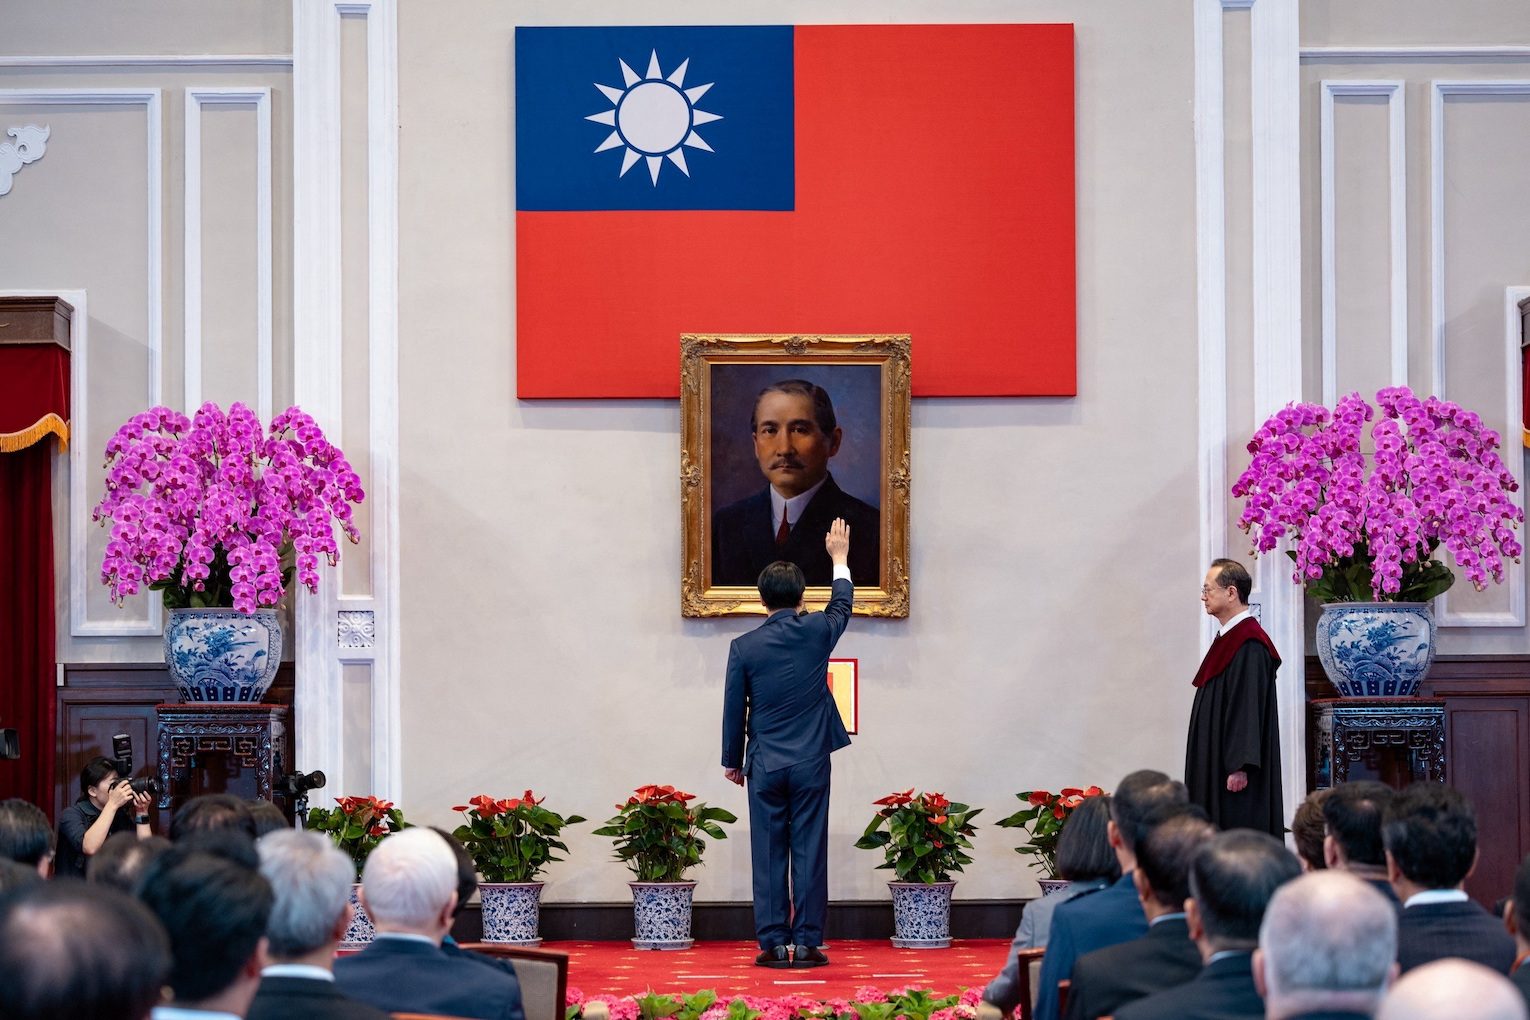 Key facts on Taiwan-China relations as new Taiwan president takes office